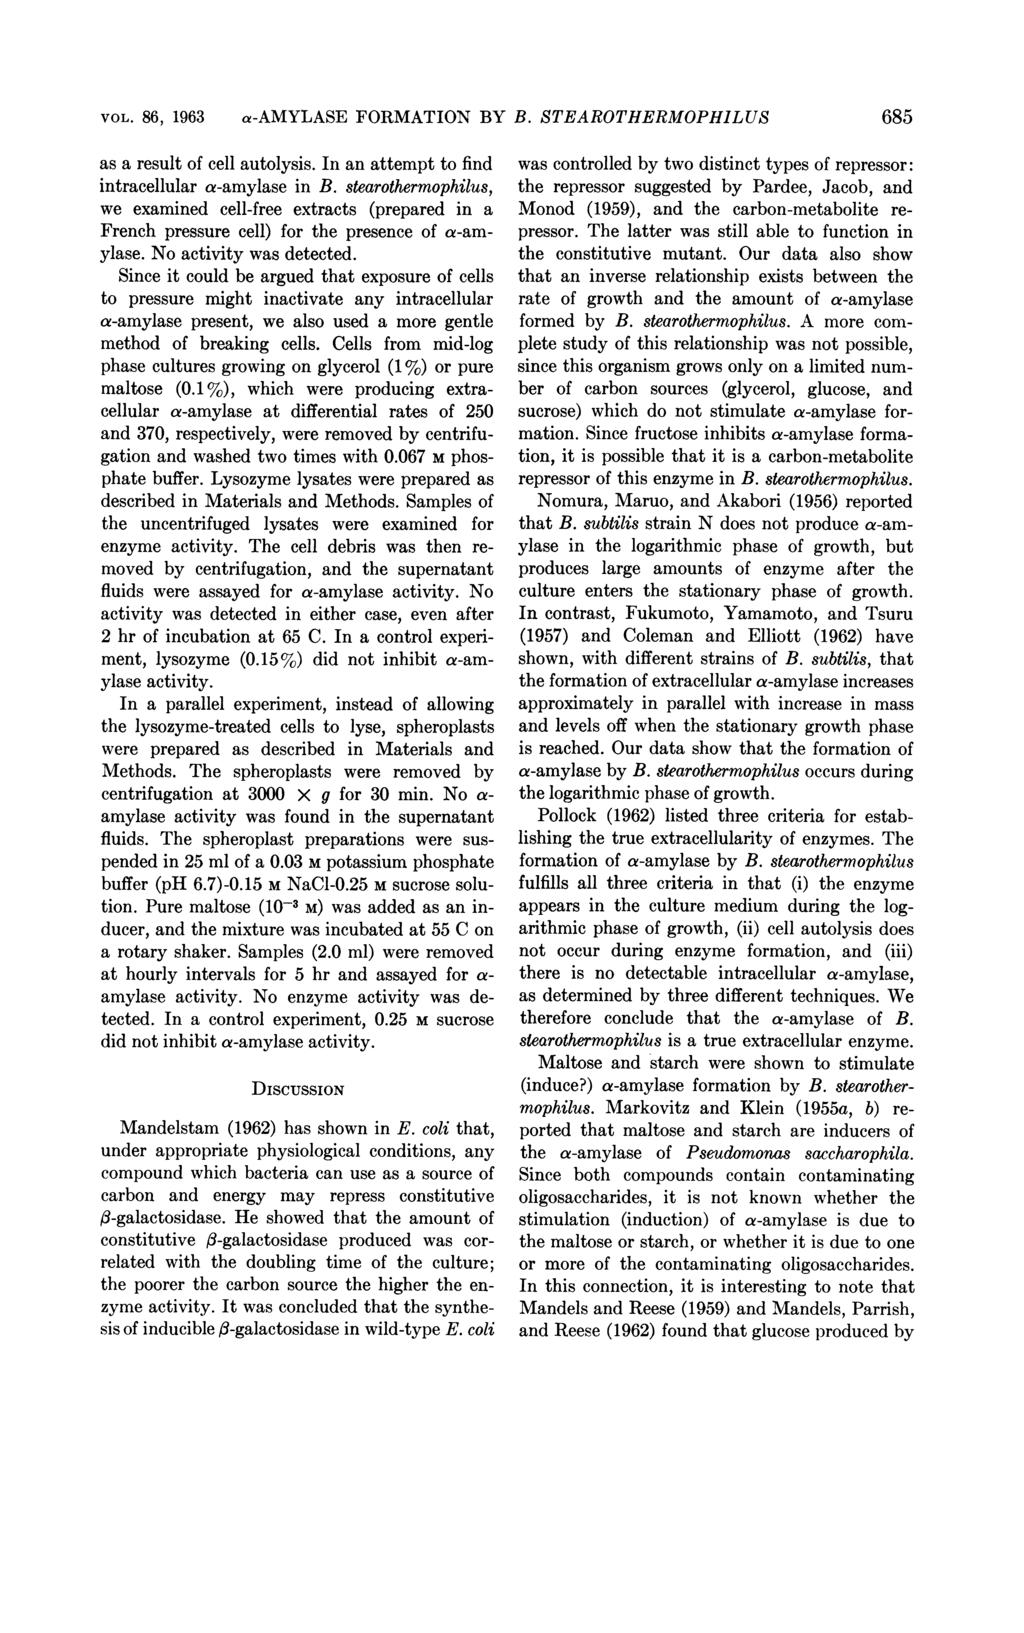 VOL. 86, 1963 a-amylase FORMATION BY B. STEAROTHERMOPHILUS 685 as a result of cell autolysis. In an attempt to find intracellular a-amylase in B.